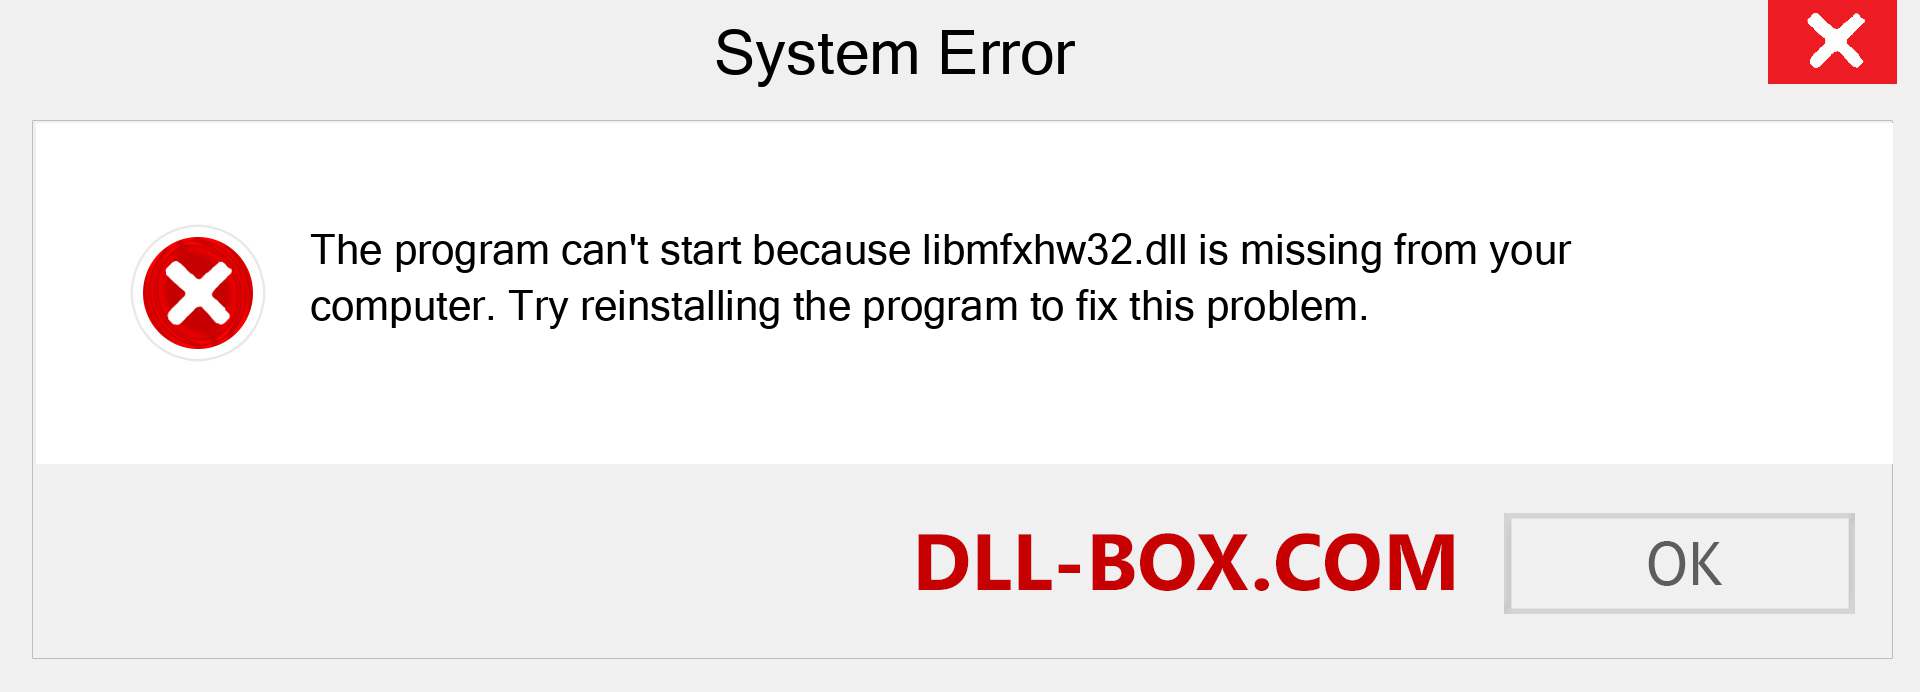  libmfxhw32.dll file is missing?. Download for Windows 7, 8, 10 - Fix  libmfxhw32 dll Missing Error on Windows, photos, images